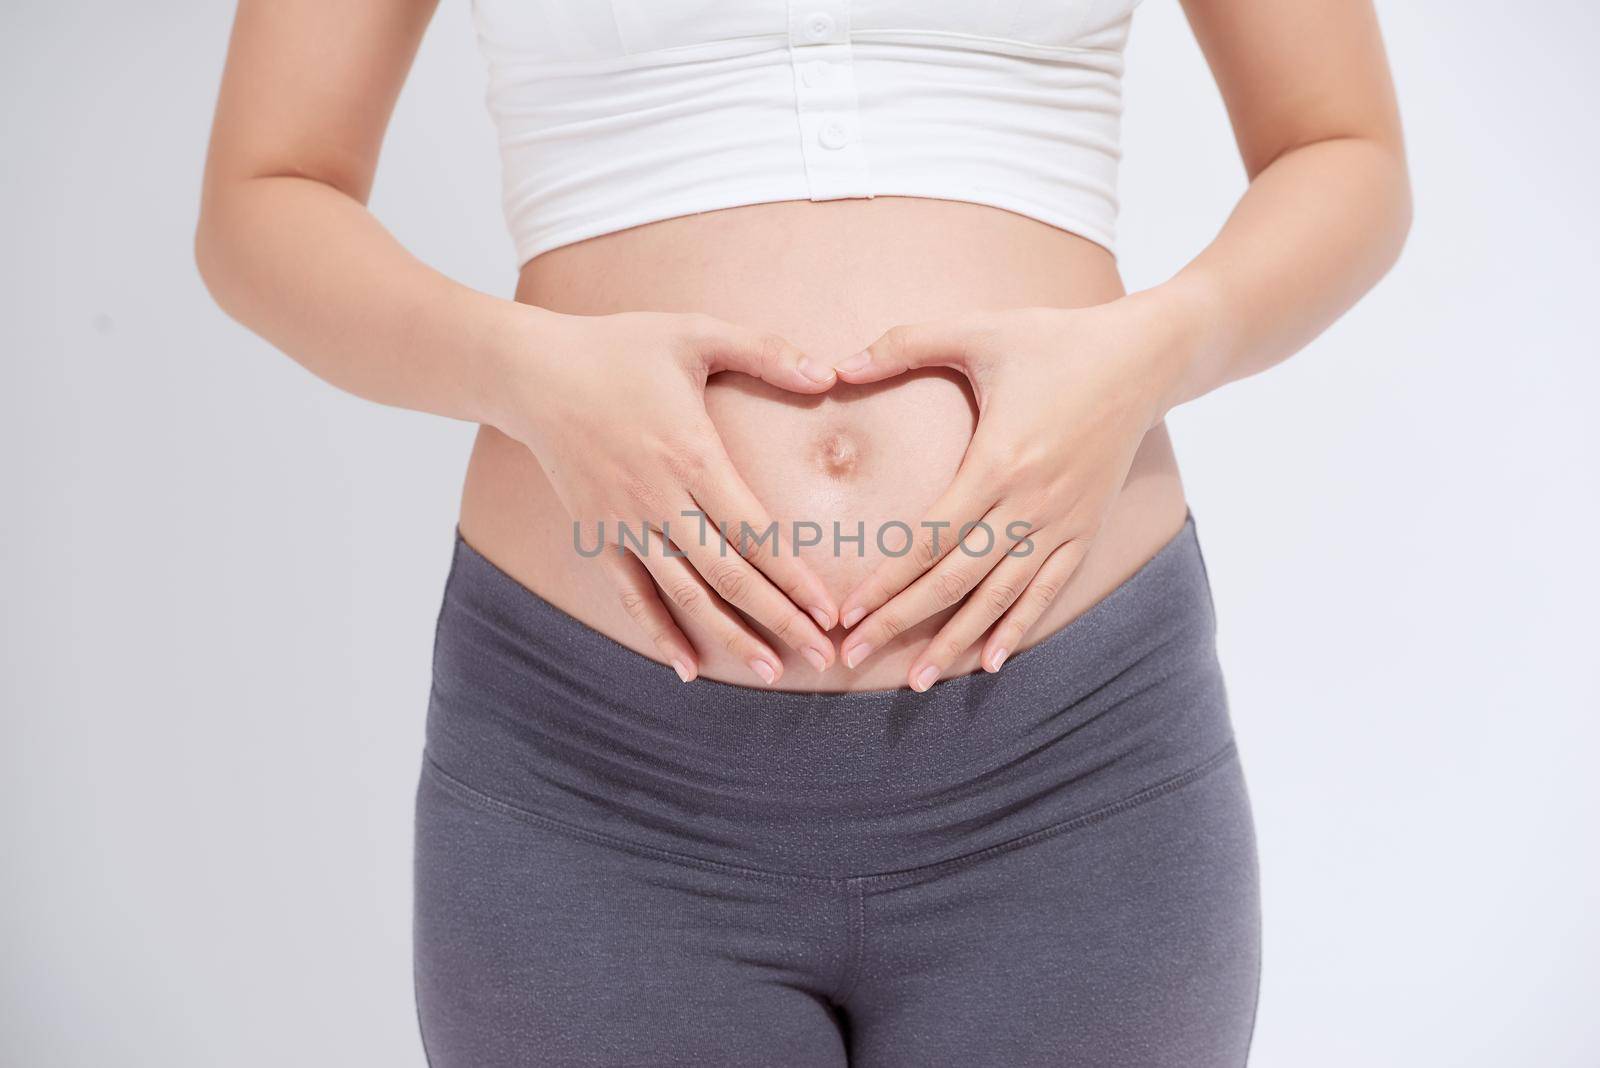 happy pregnant woman holding hands in heart shape on belly